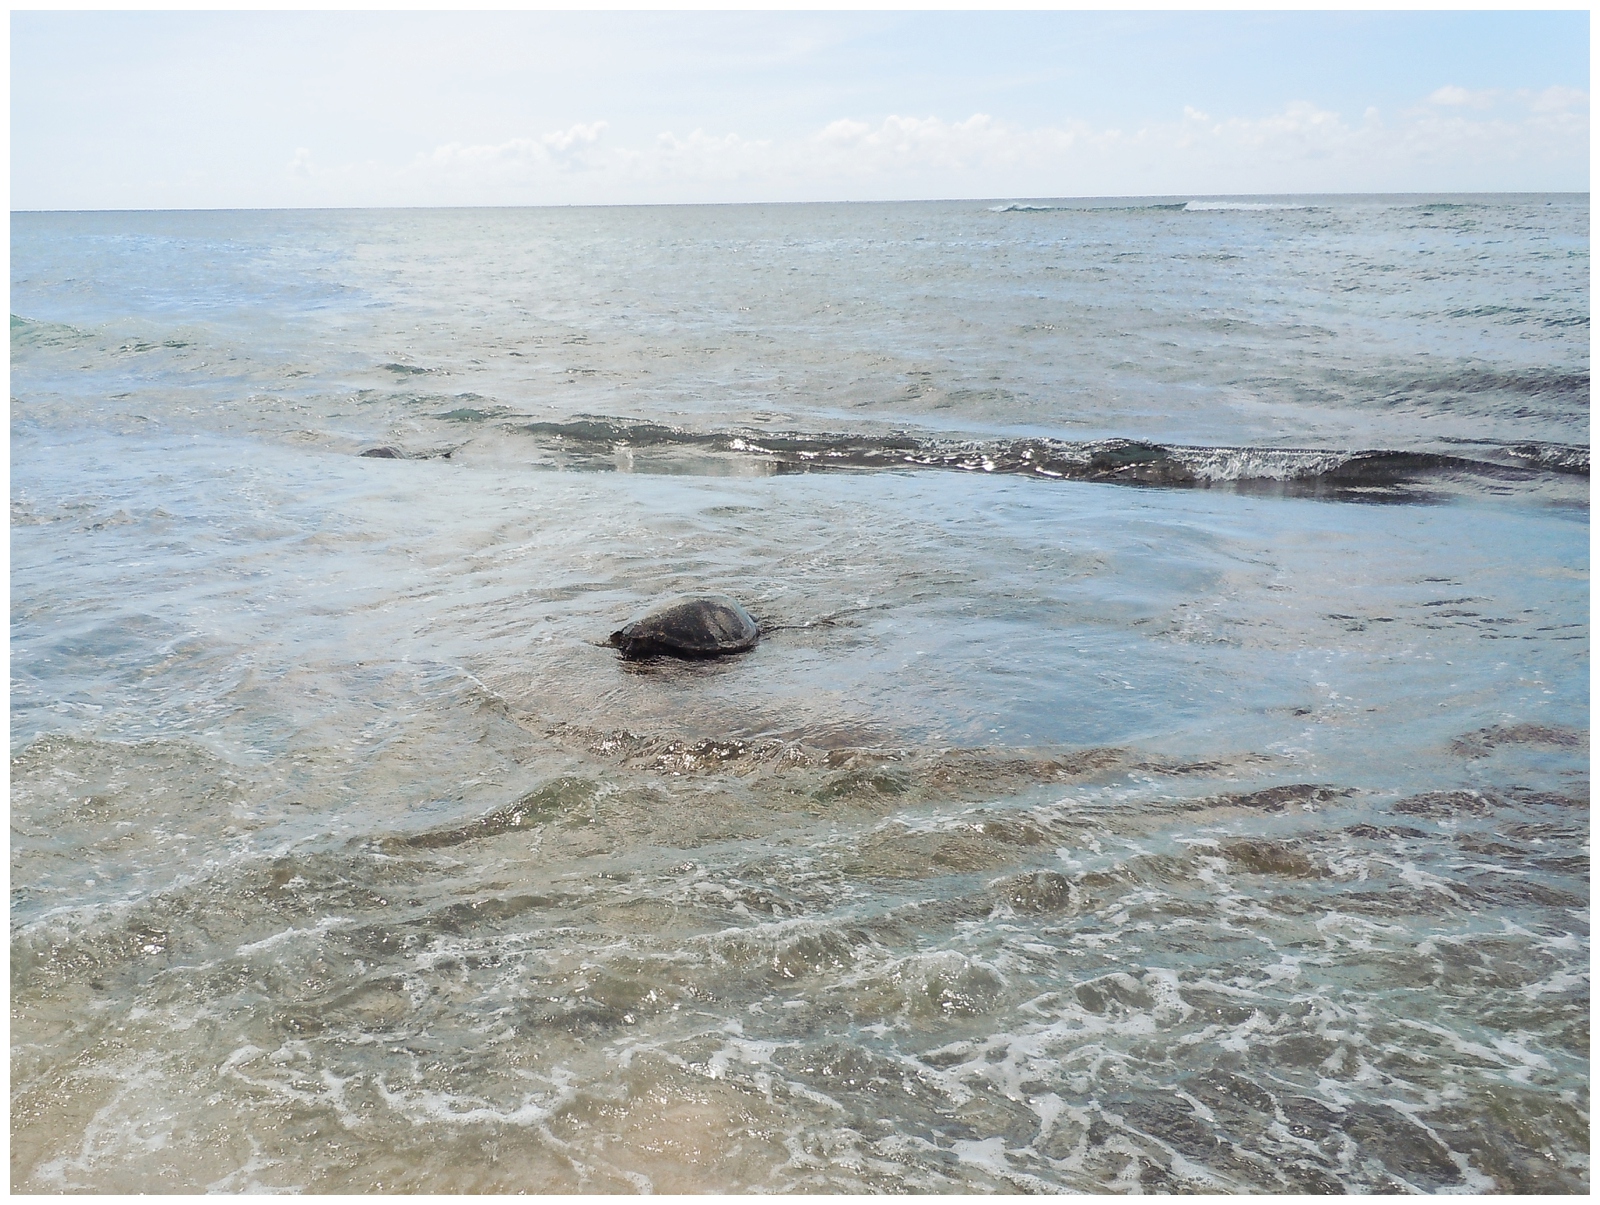 turtles at The North Shore - Sunset Beach - Turtle Bay swimming in the ocean